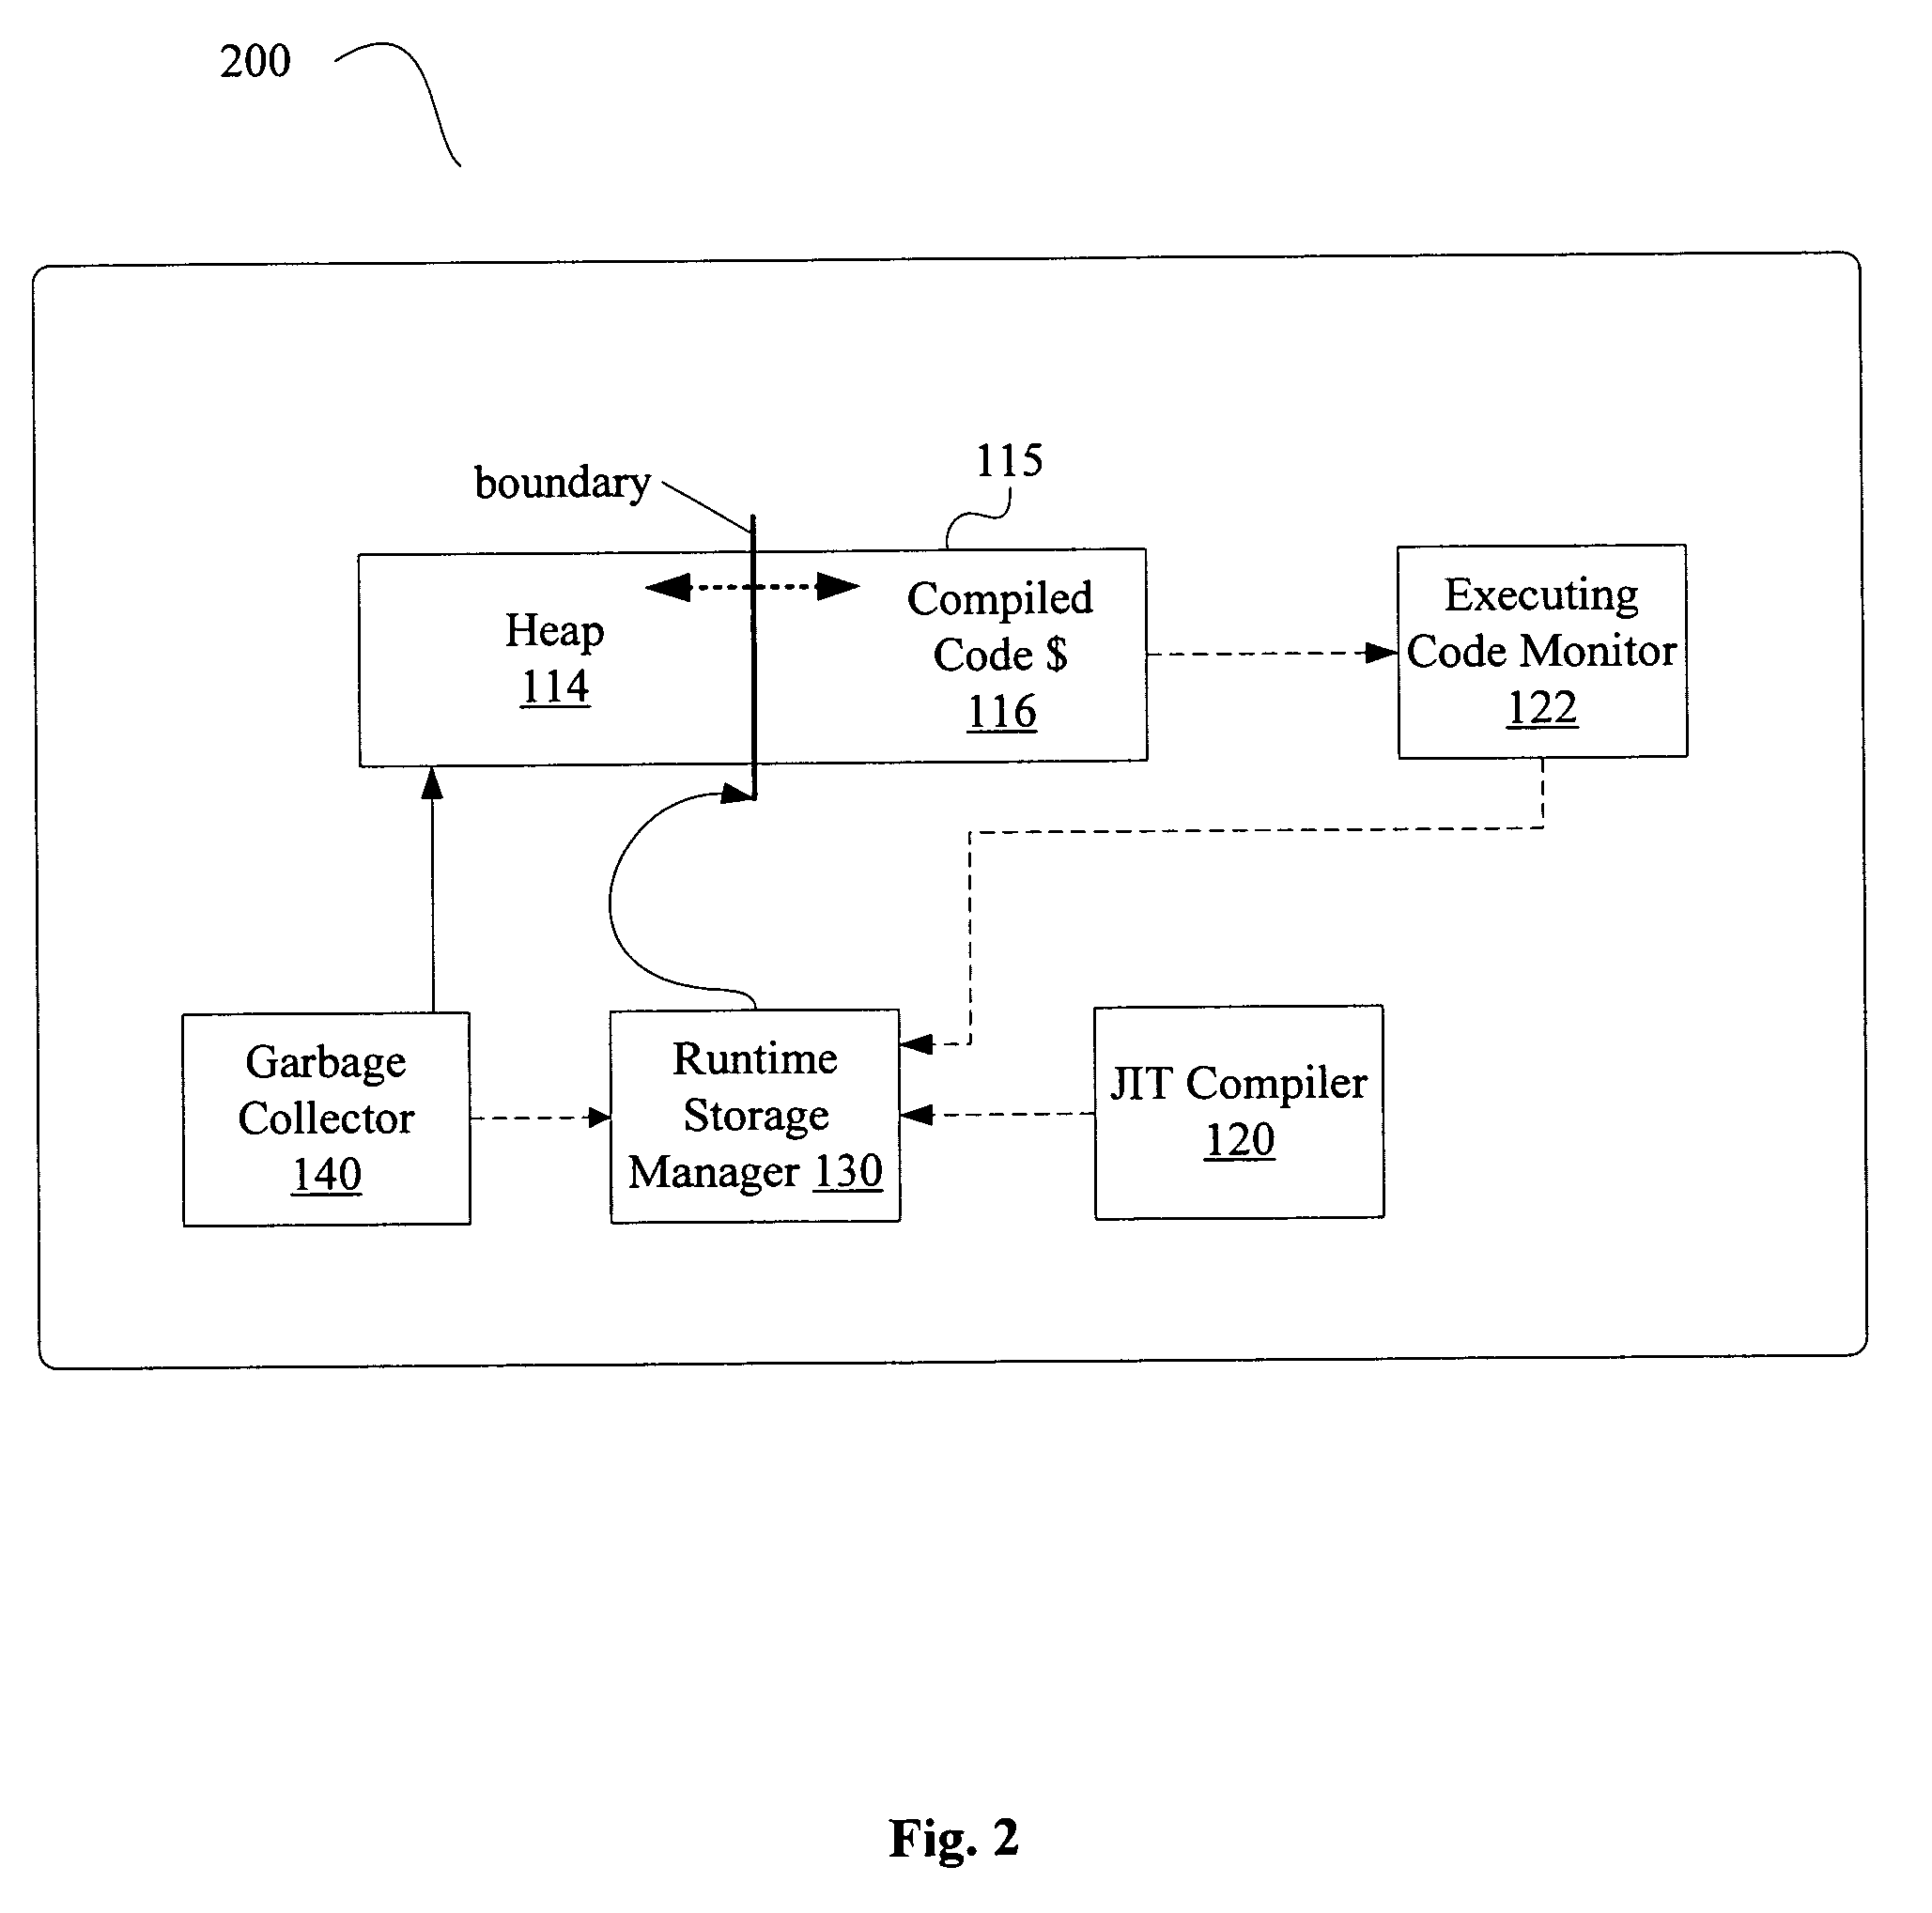 Method and apparatus for feedback-based management of combined heap and compiled code caches